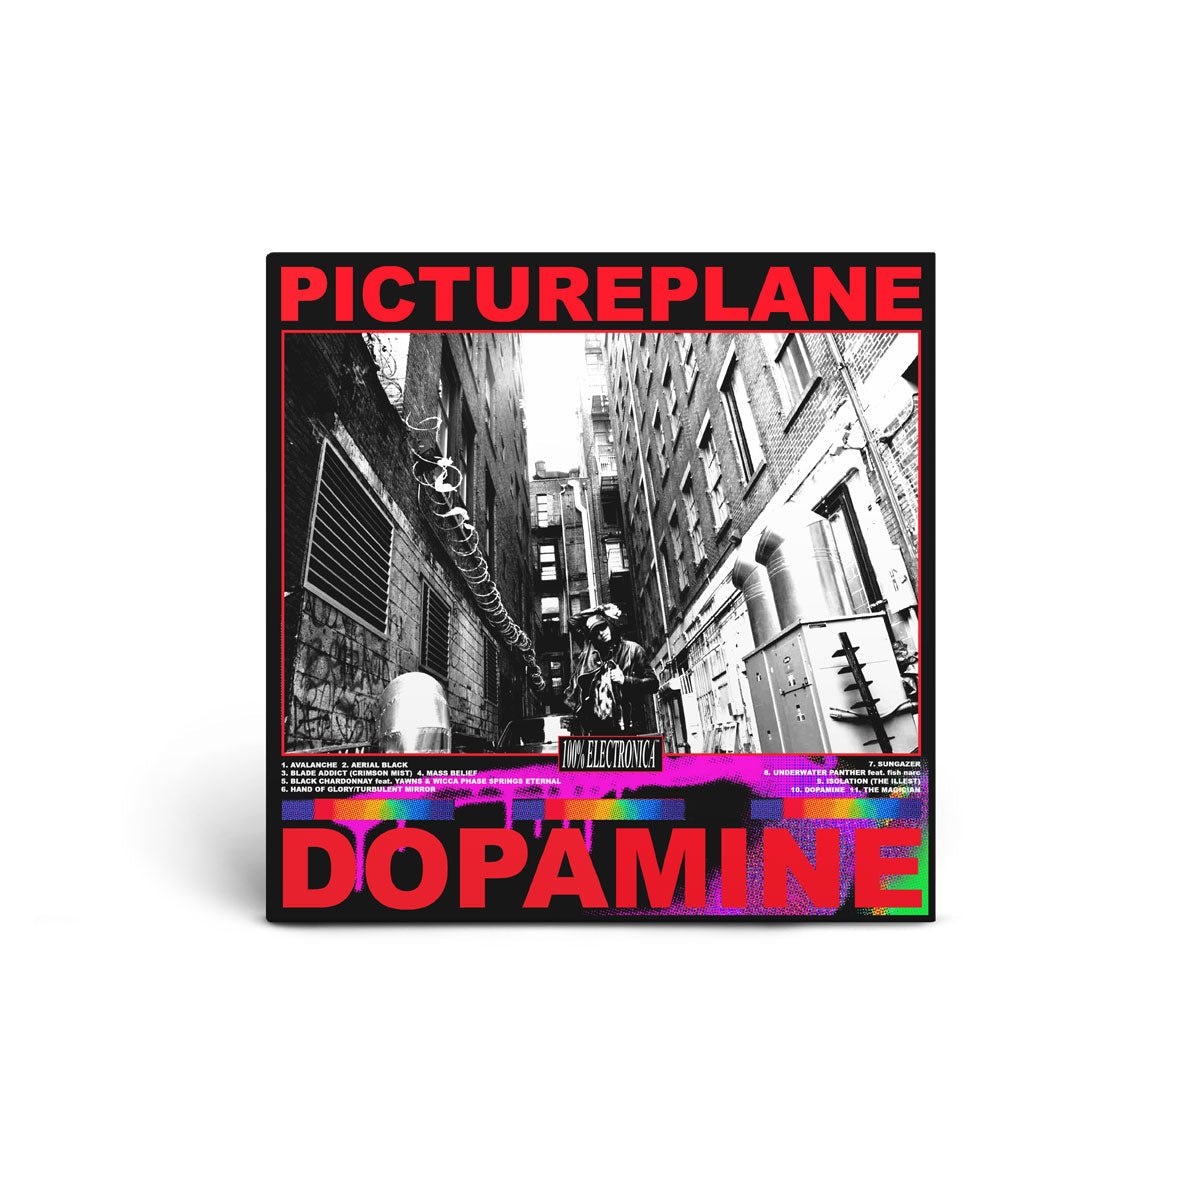 PICTUREPLANE - Dopamine LP - 100% Electronica Official Store (Photo 3)